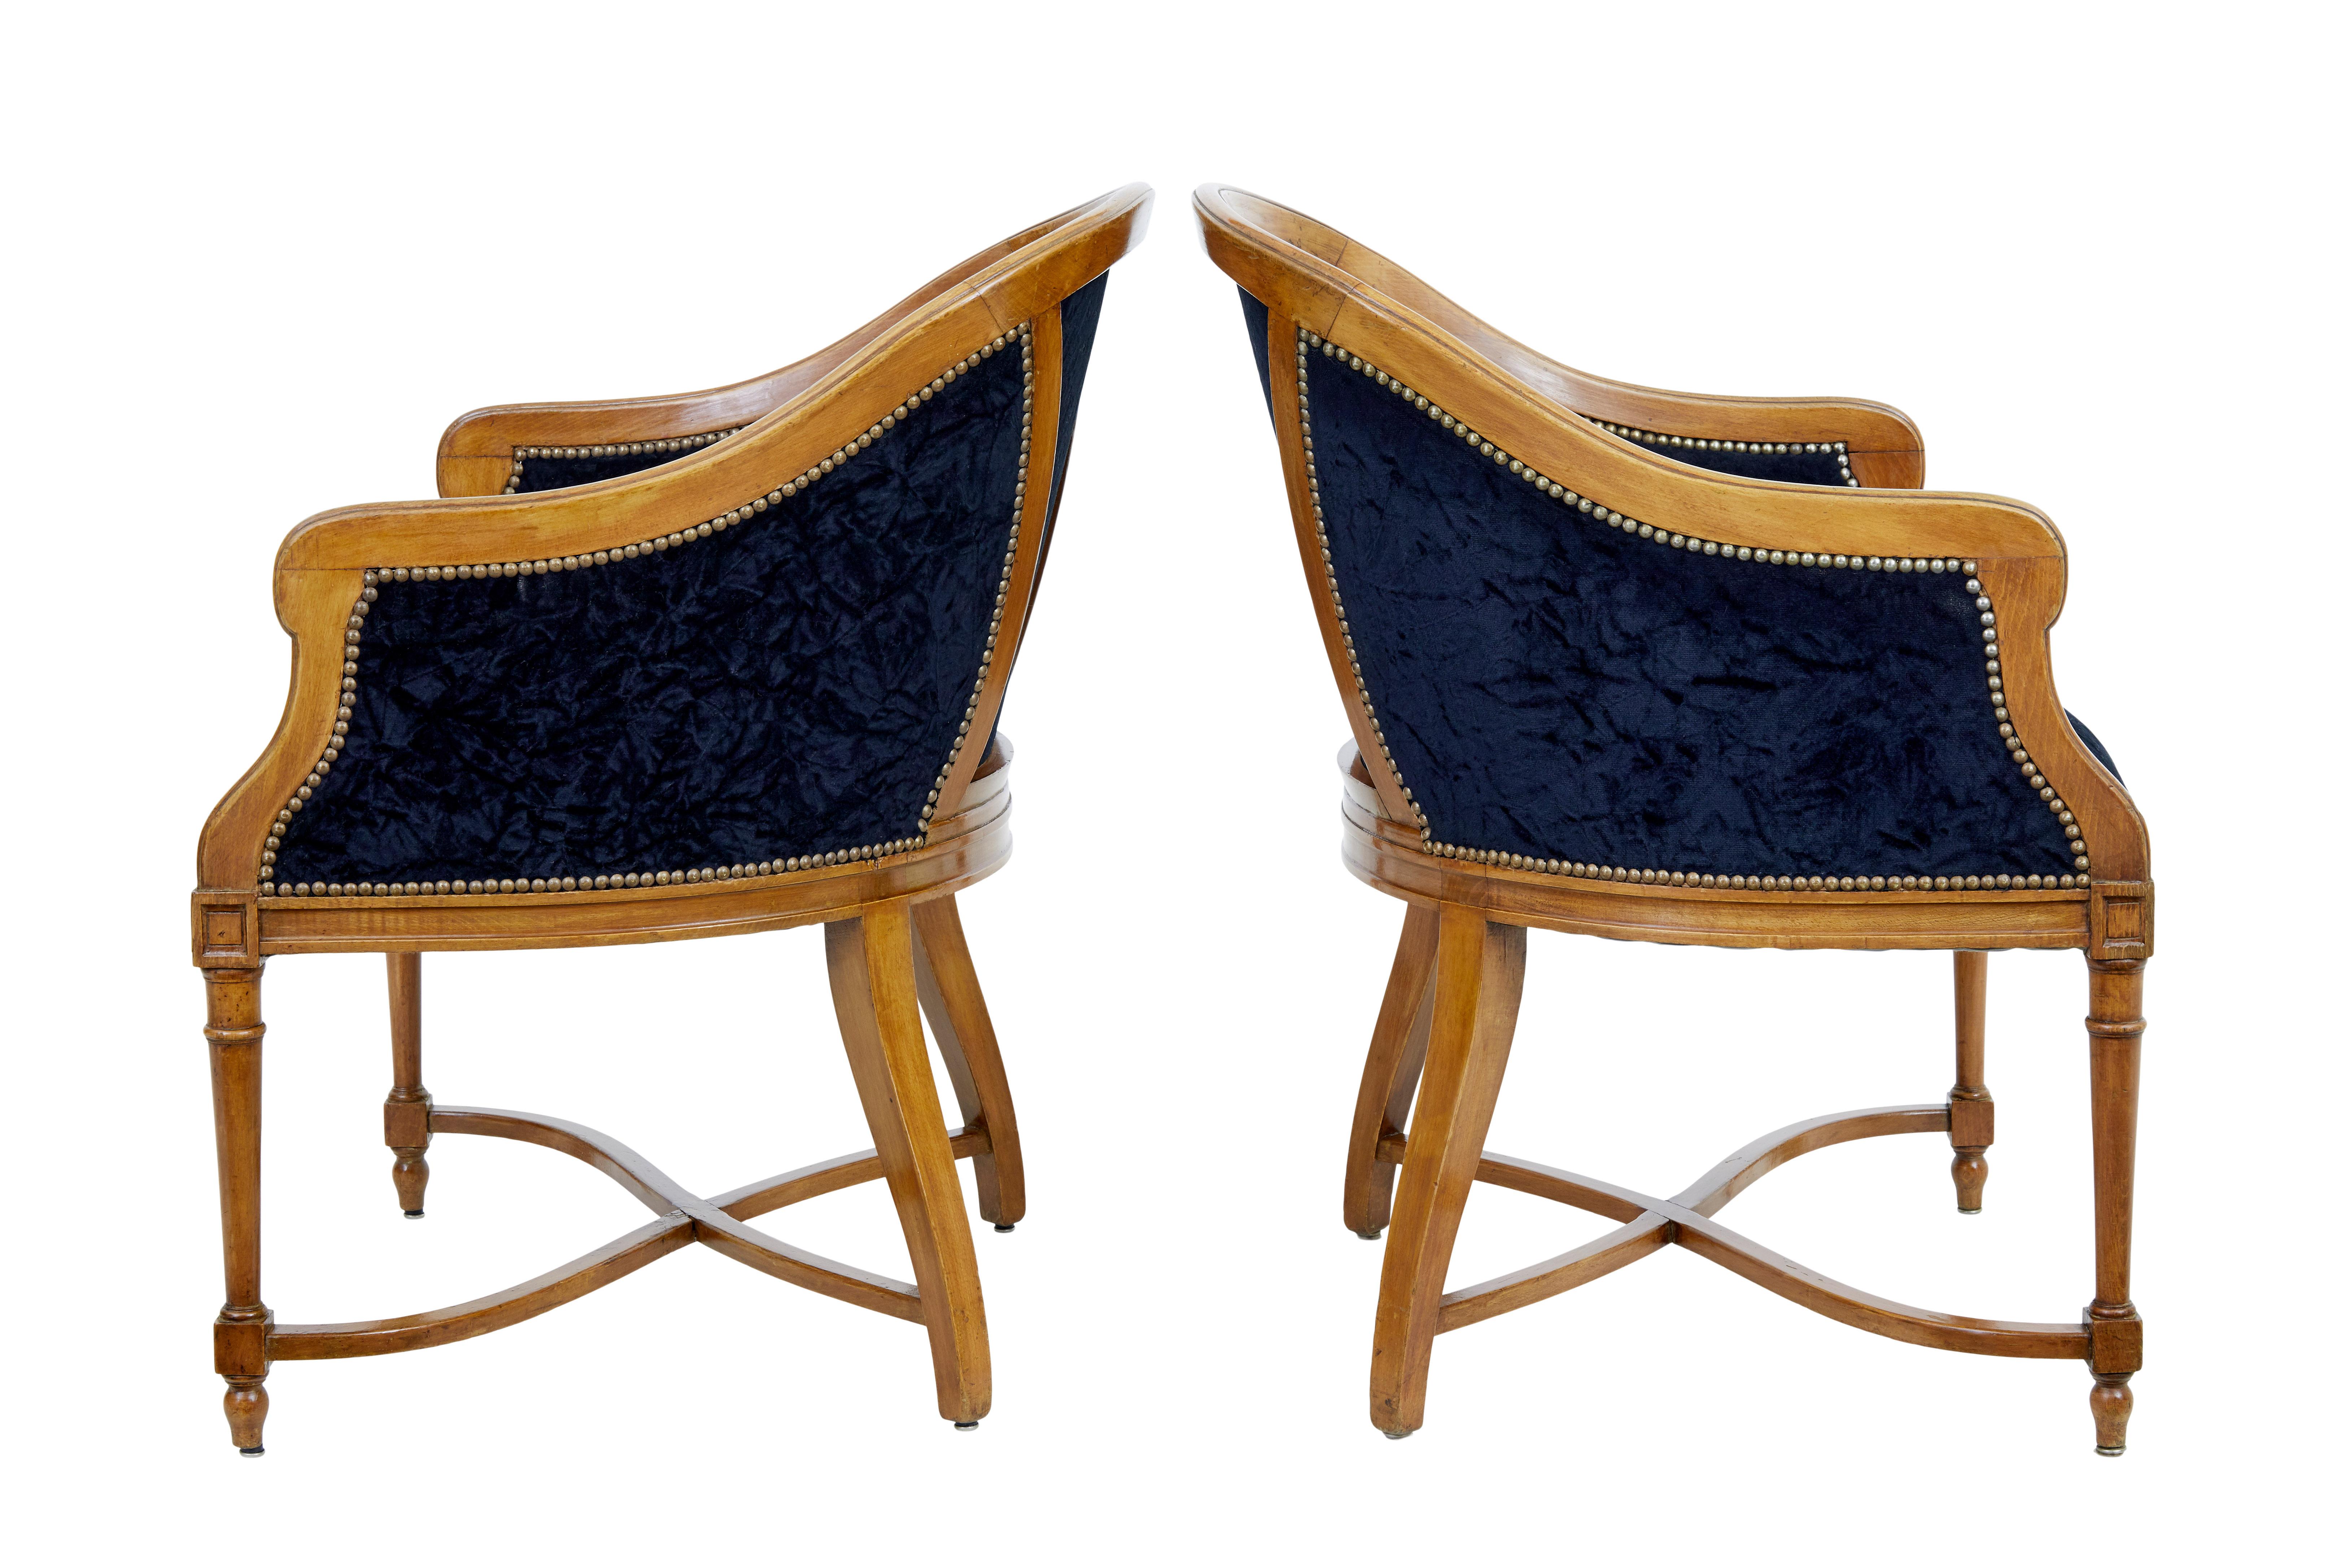 Pair of early 20th century lounge chairs circa 1910.

Good quality pair of hand crafted chairs made in beech and stained to look like elm.

Very comfortable chairs, richly upholstered in dark blue crushed velvet and decorated with brass stud work. 